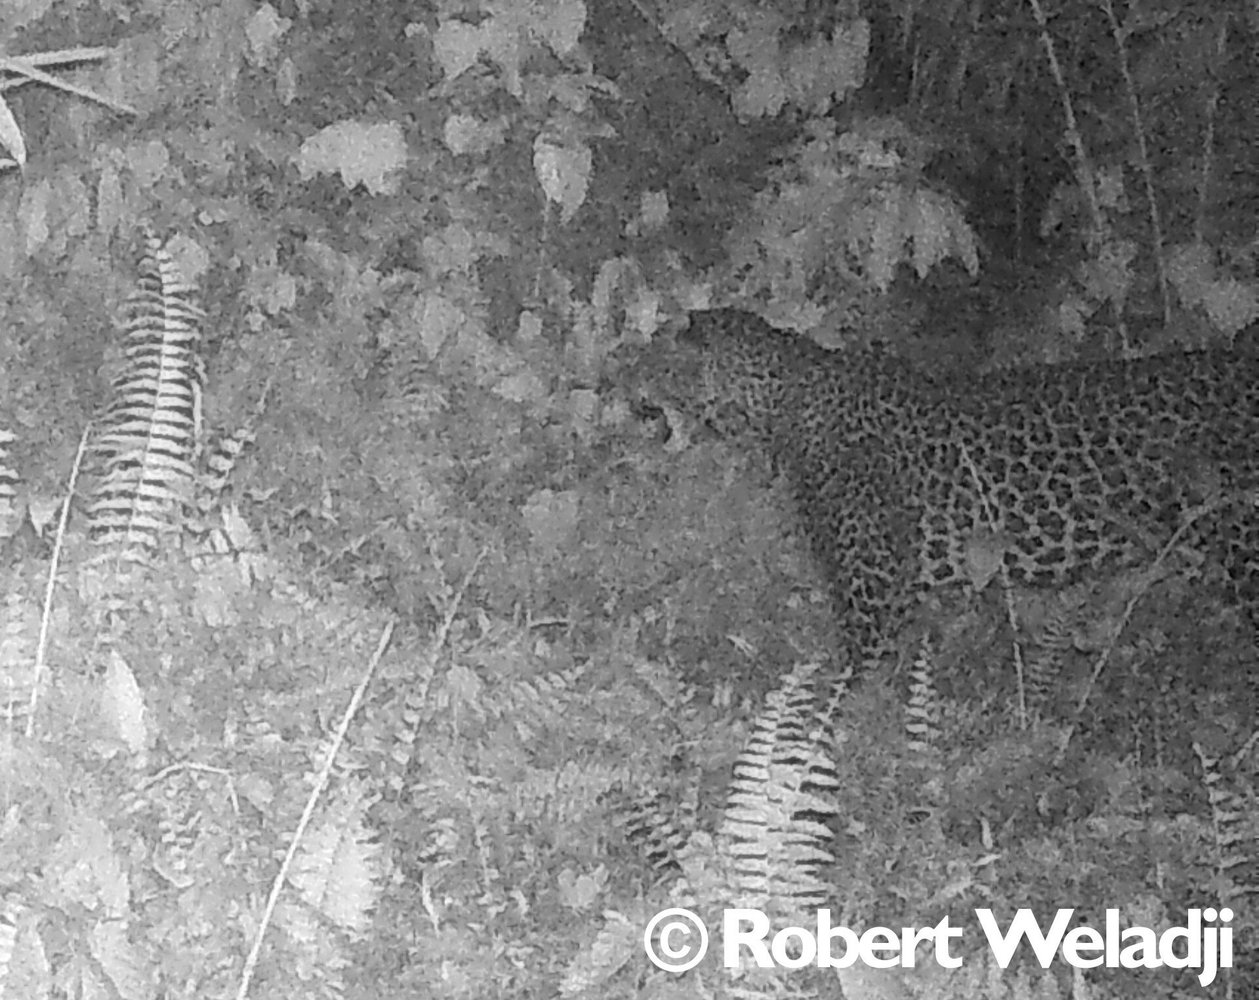 Leopard spotted in southwestern Cameroon for the first time in 20 years - Leopard, Big cats, Cat family, Predator, Wild animals, Africa, Middle Africa, Cameroon, , National park, Phototrap, Rare view, Vulnerability, Protection of Nature, wildlife, The national geographic, Video, Longpost